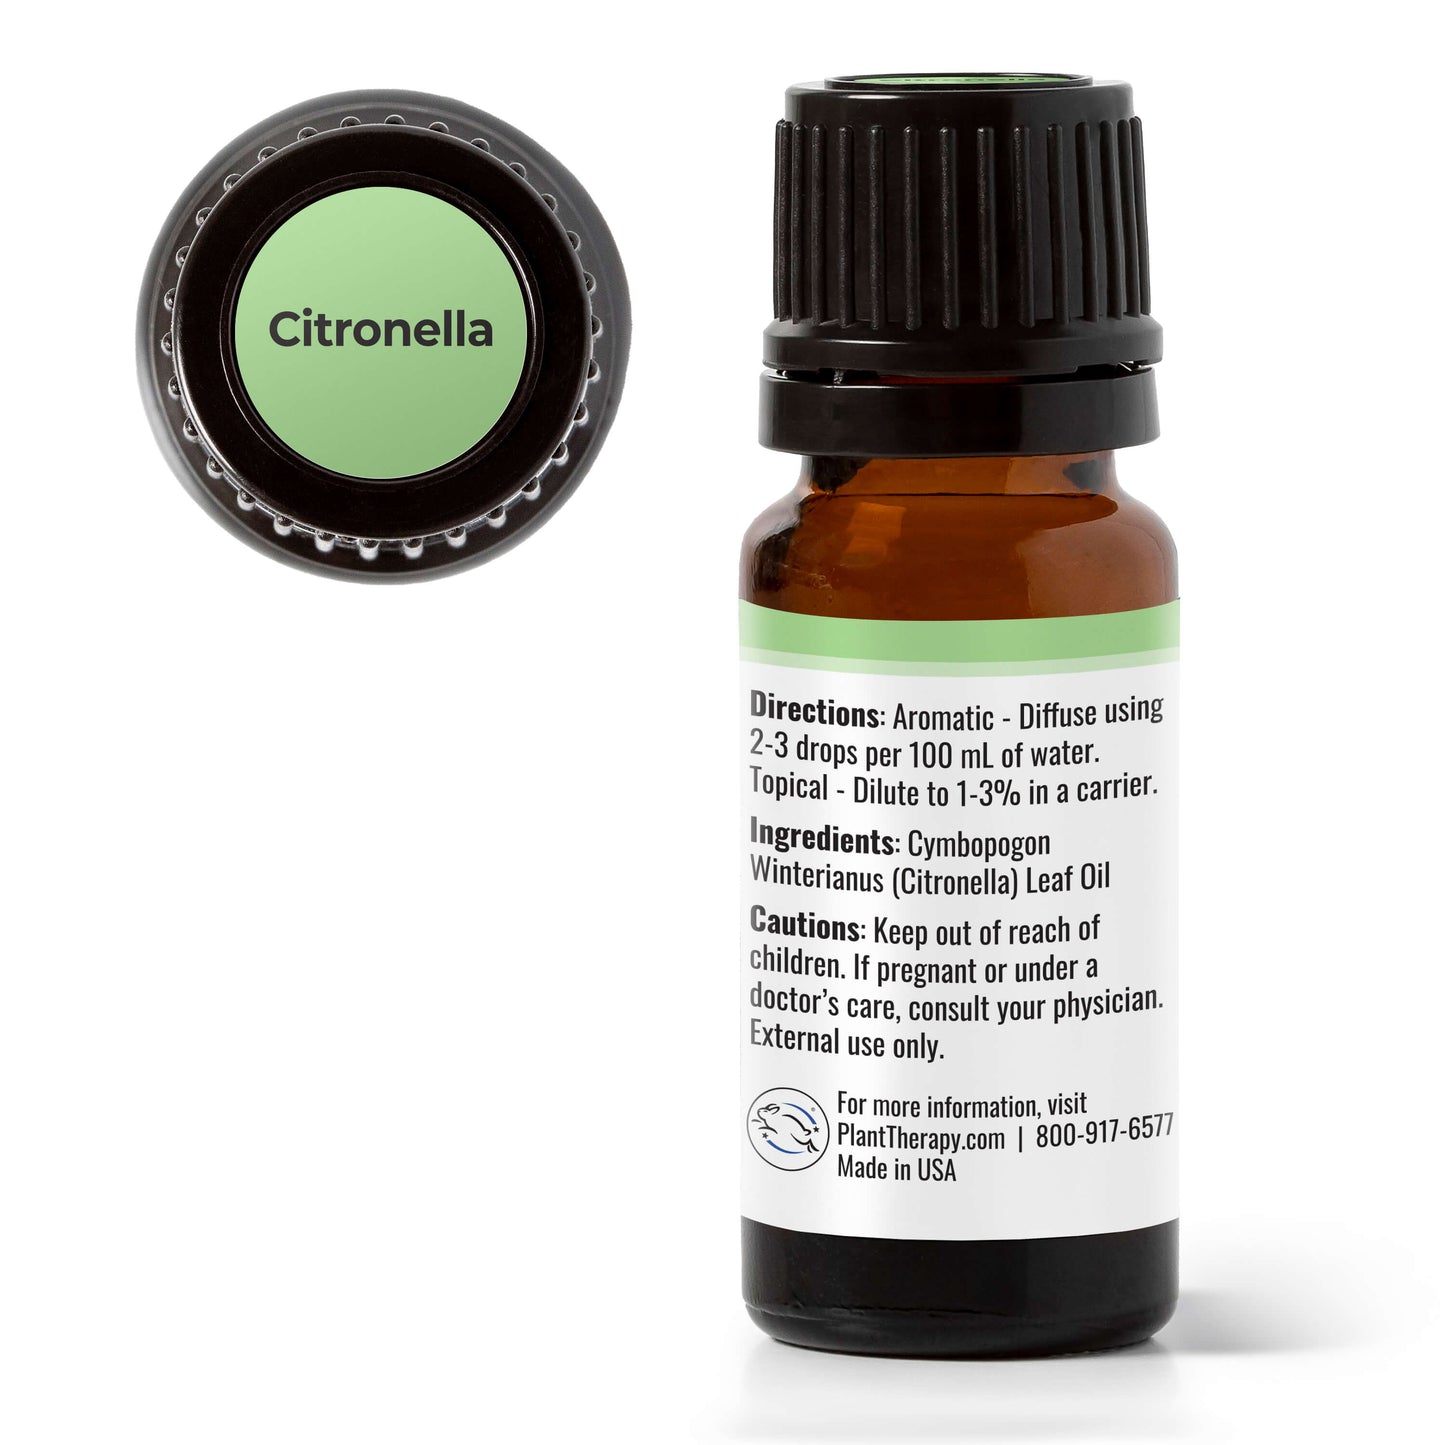 back label of Citronella Essential Oil with directions and ingredients